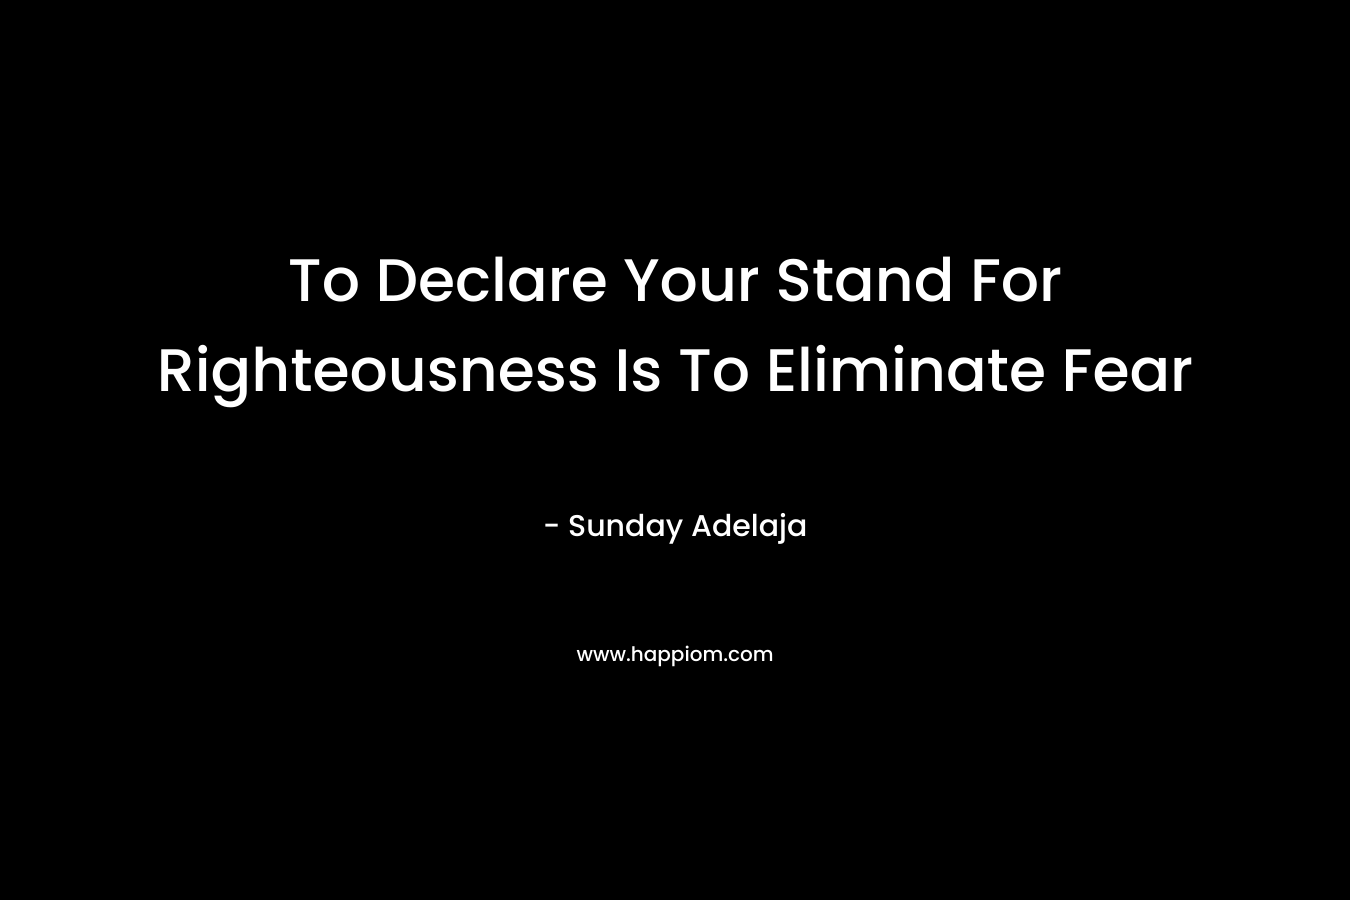 To Declare Your Stand For Righteousness Is To Eliminate Fear